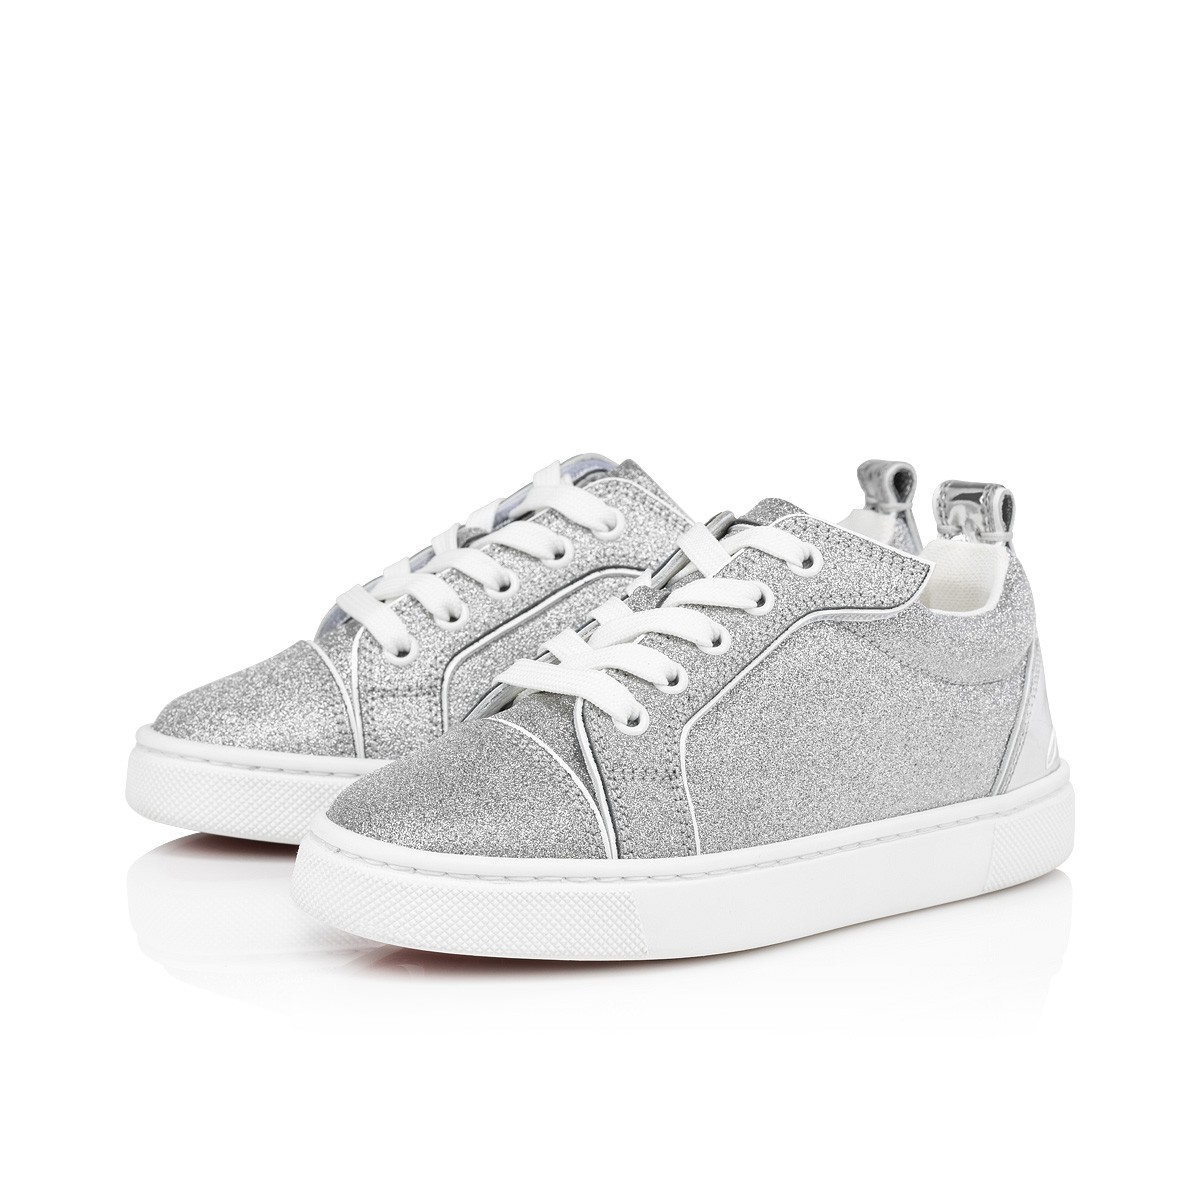 Funnyto Silver Calf leather - Unisex Kid Shoes - Christian Louboutin